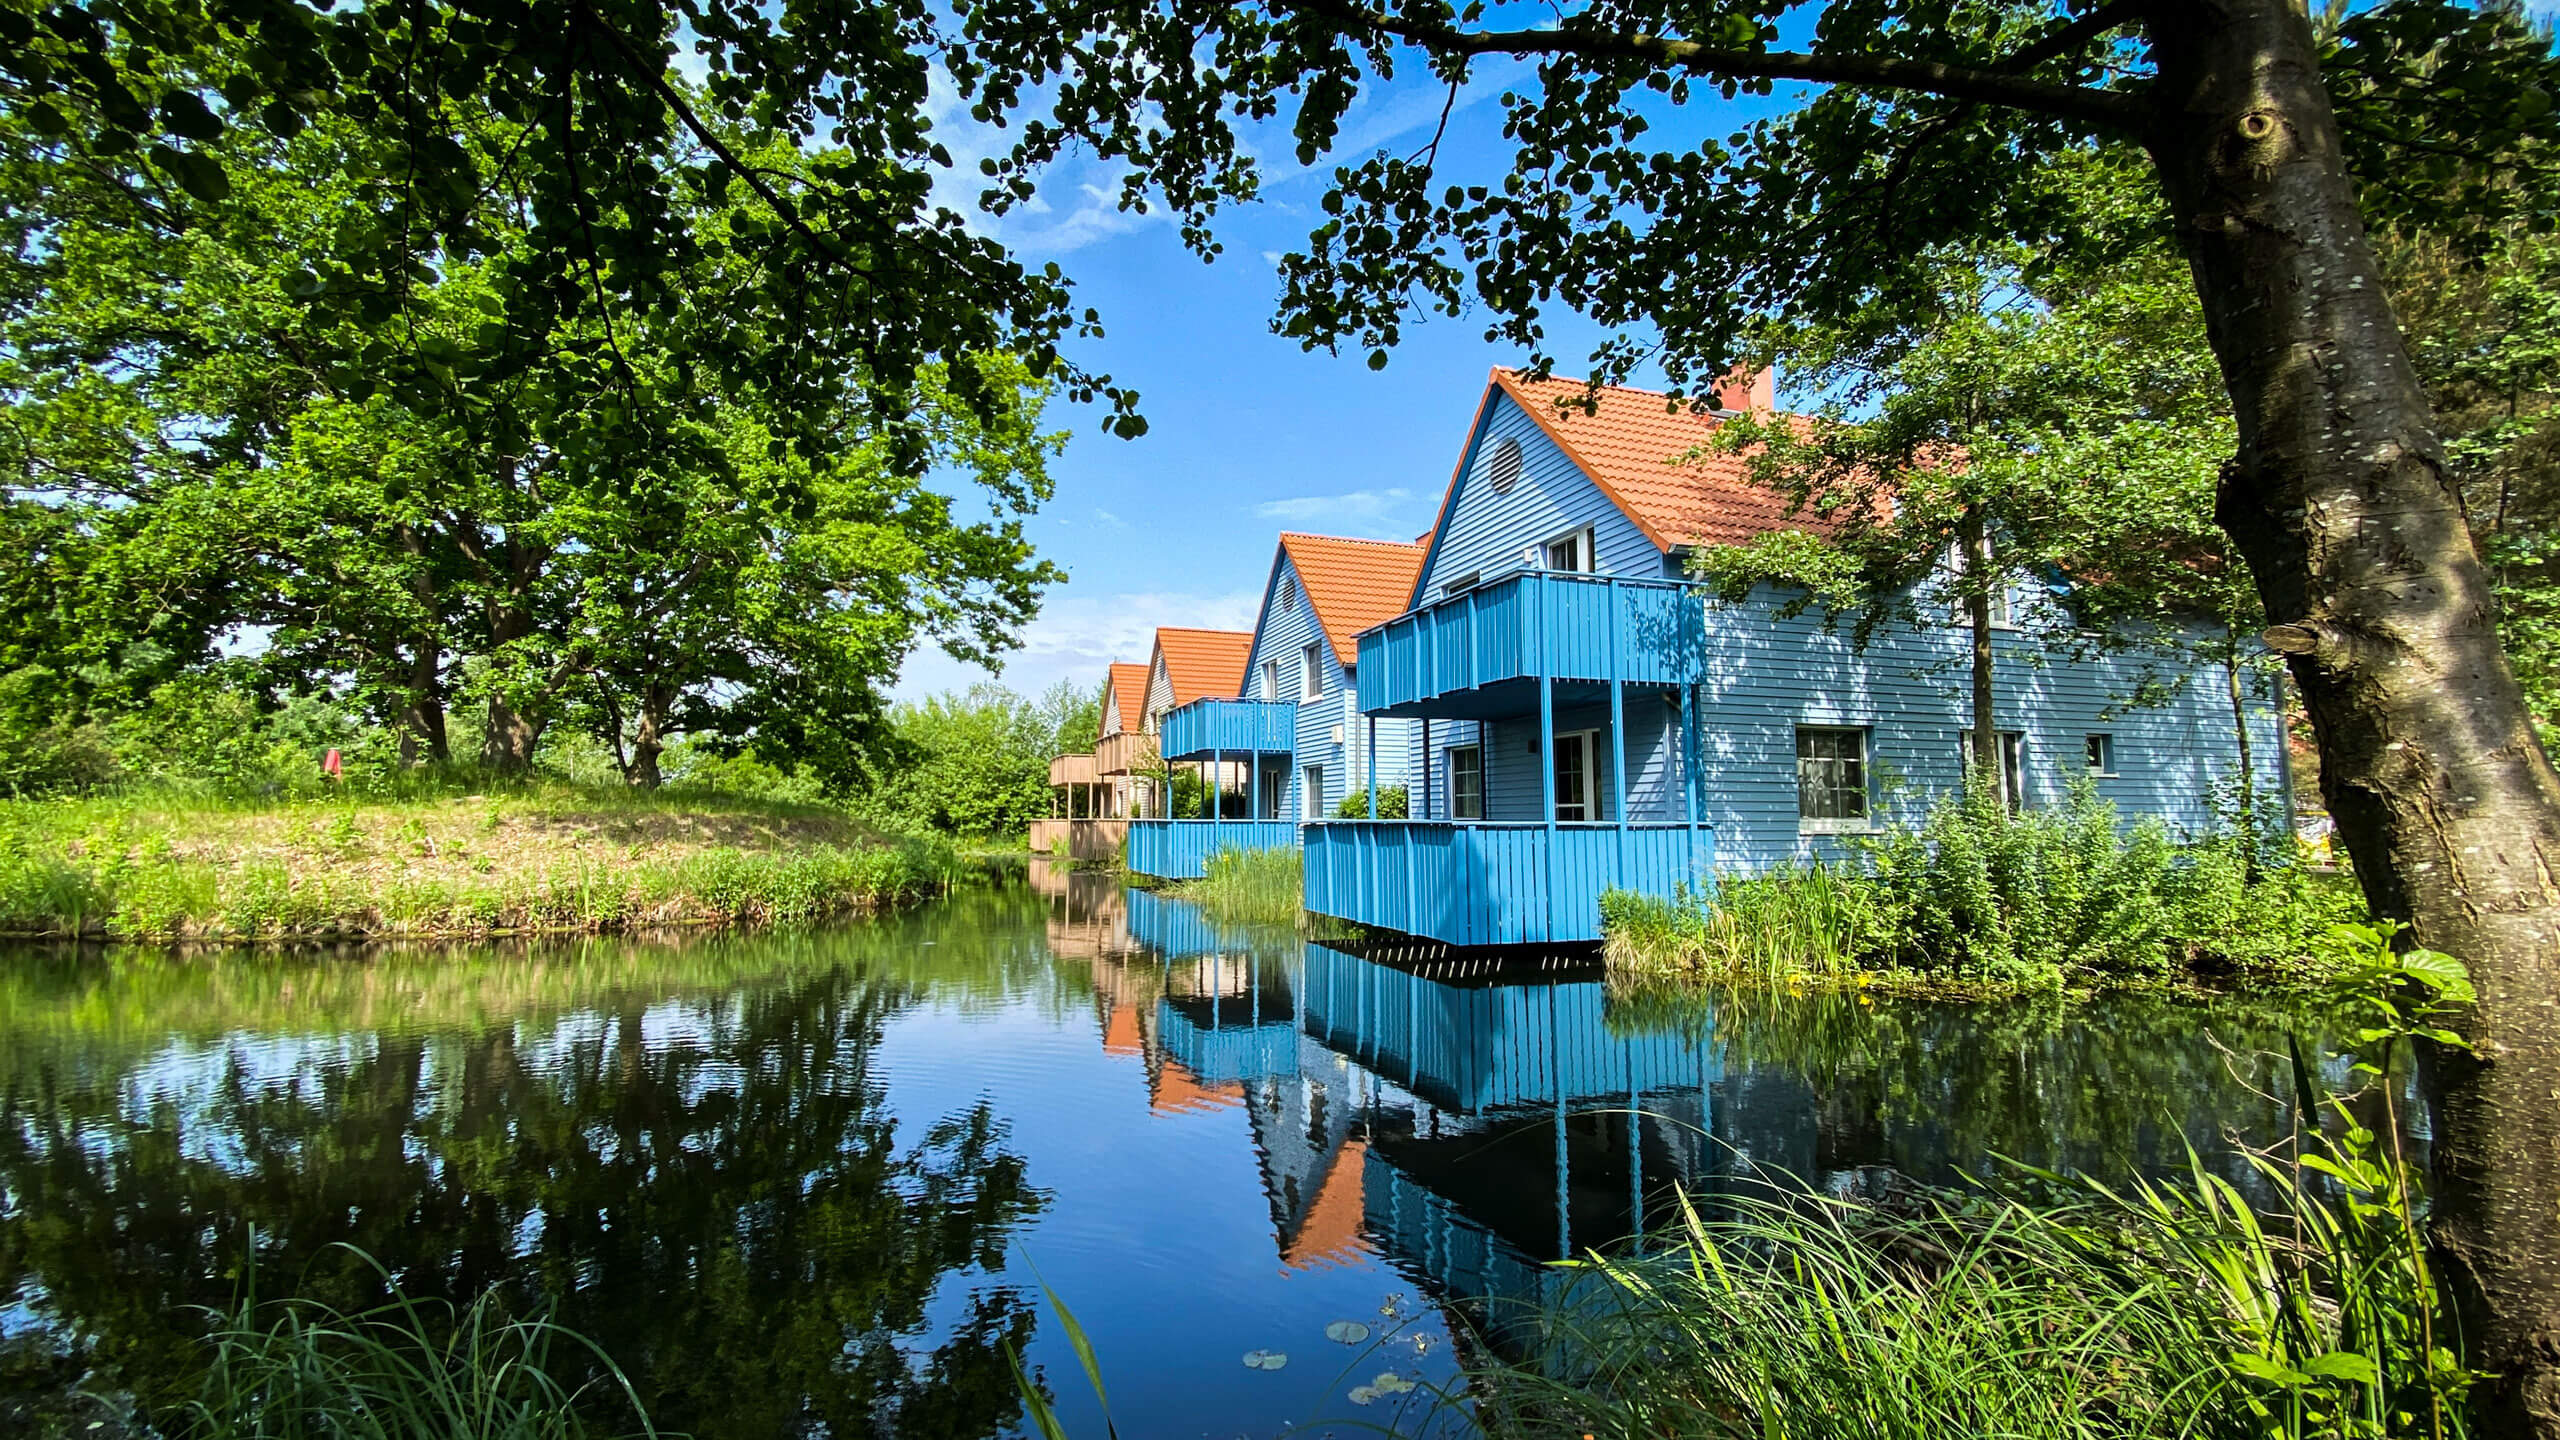 A scenic view of a row of houses by the riverside with trees and buildings in the background